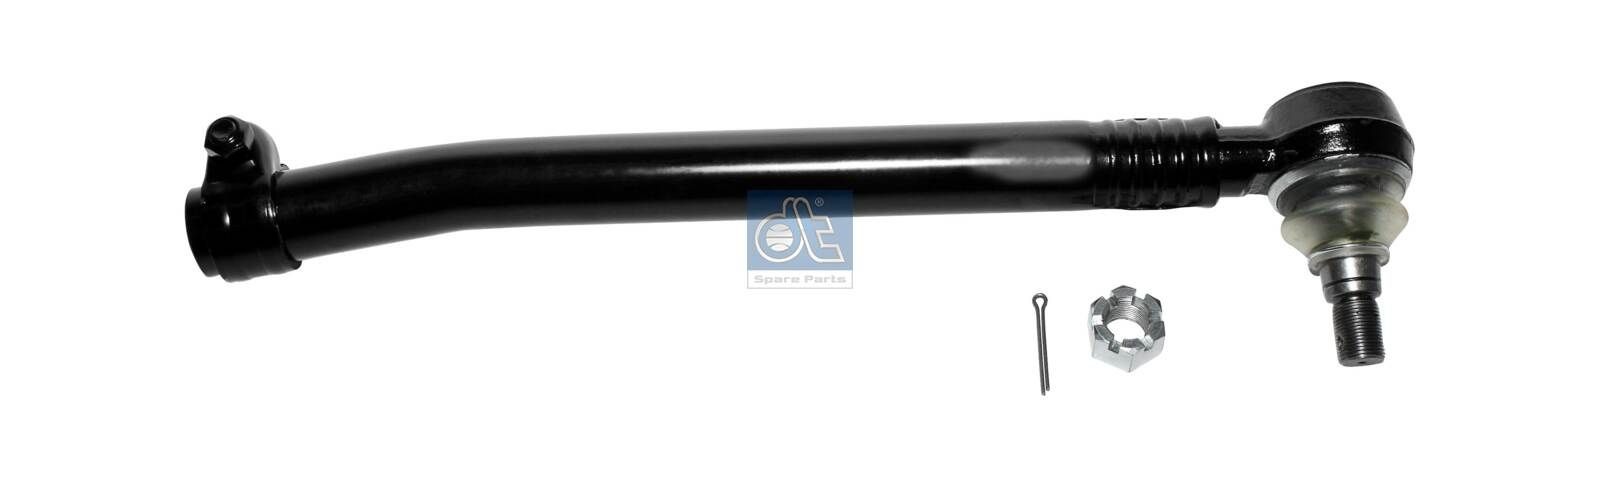 DT Spare Parts 2.53173 Rod Assembly 8 5104 265